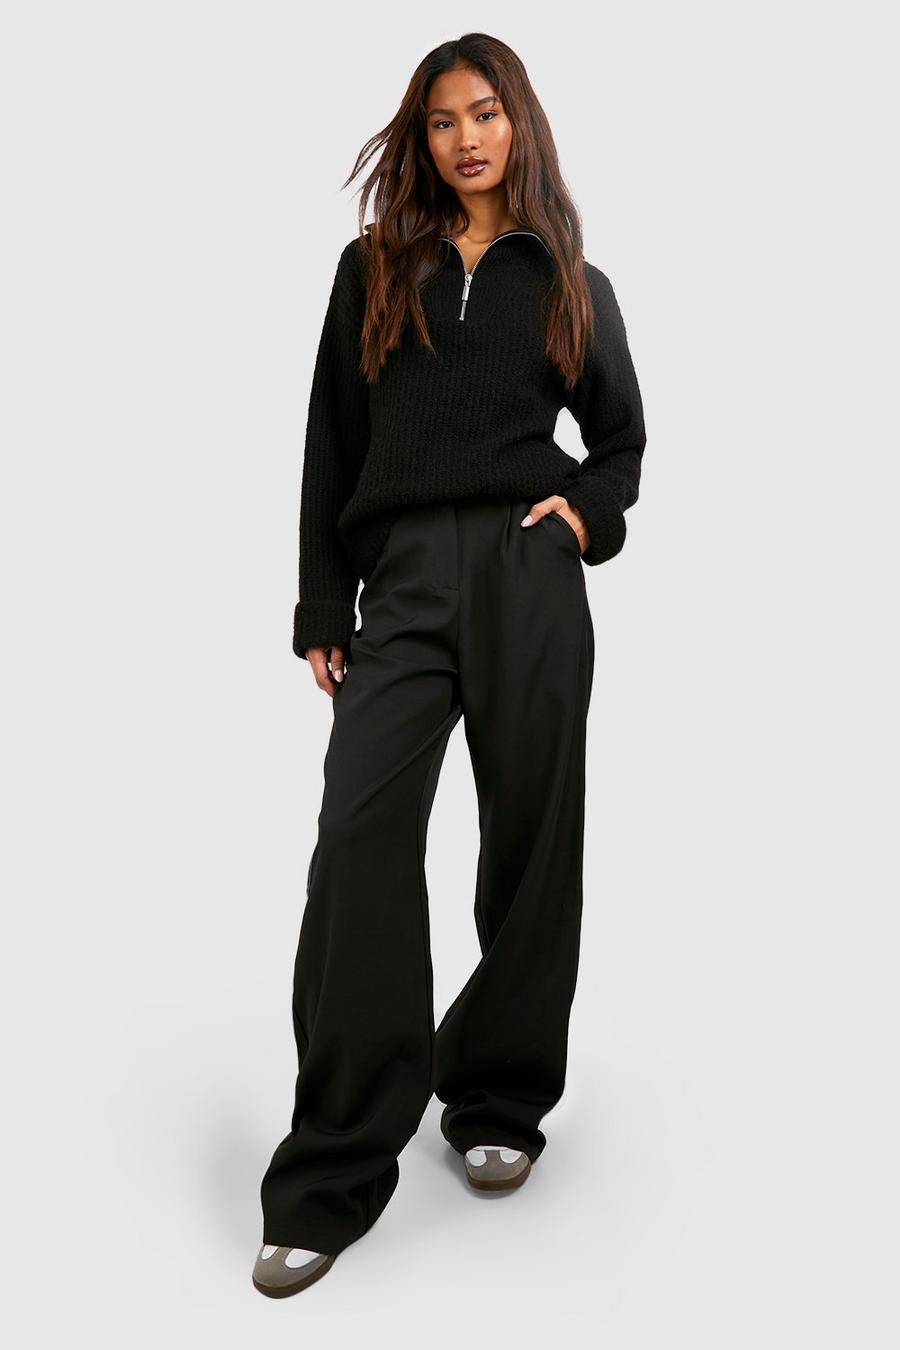 Black Tall Tailored Wide Leg Trousers